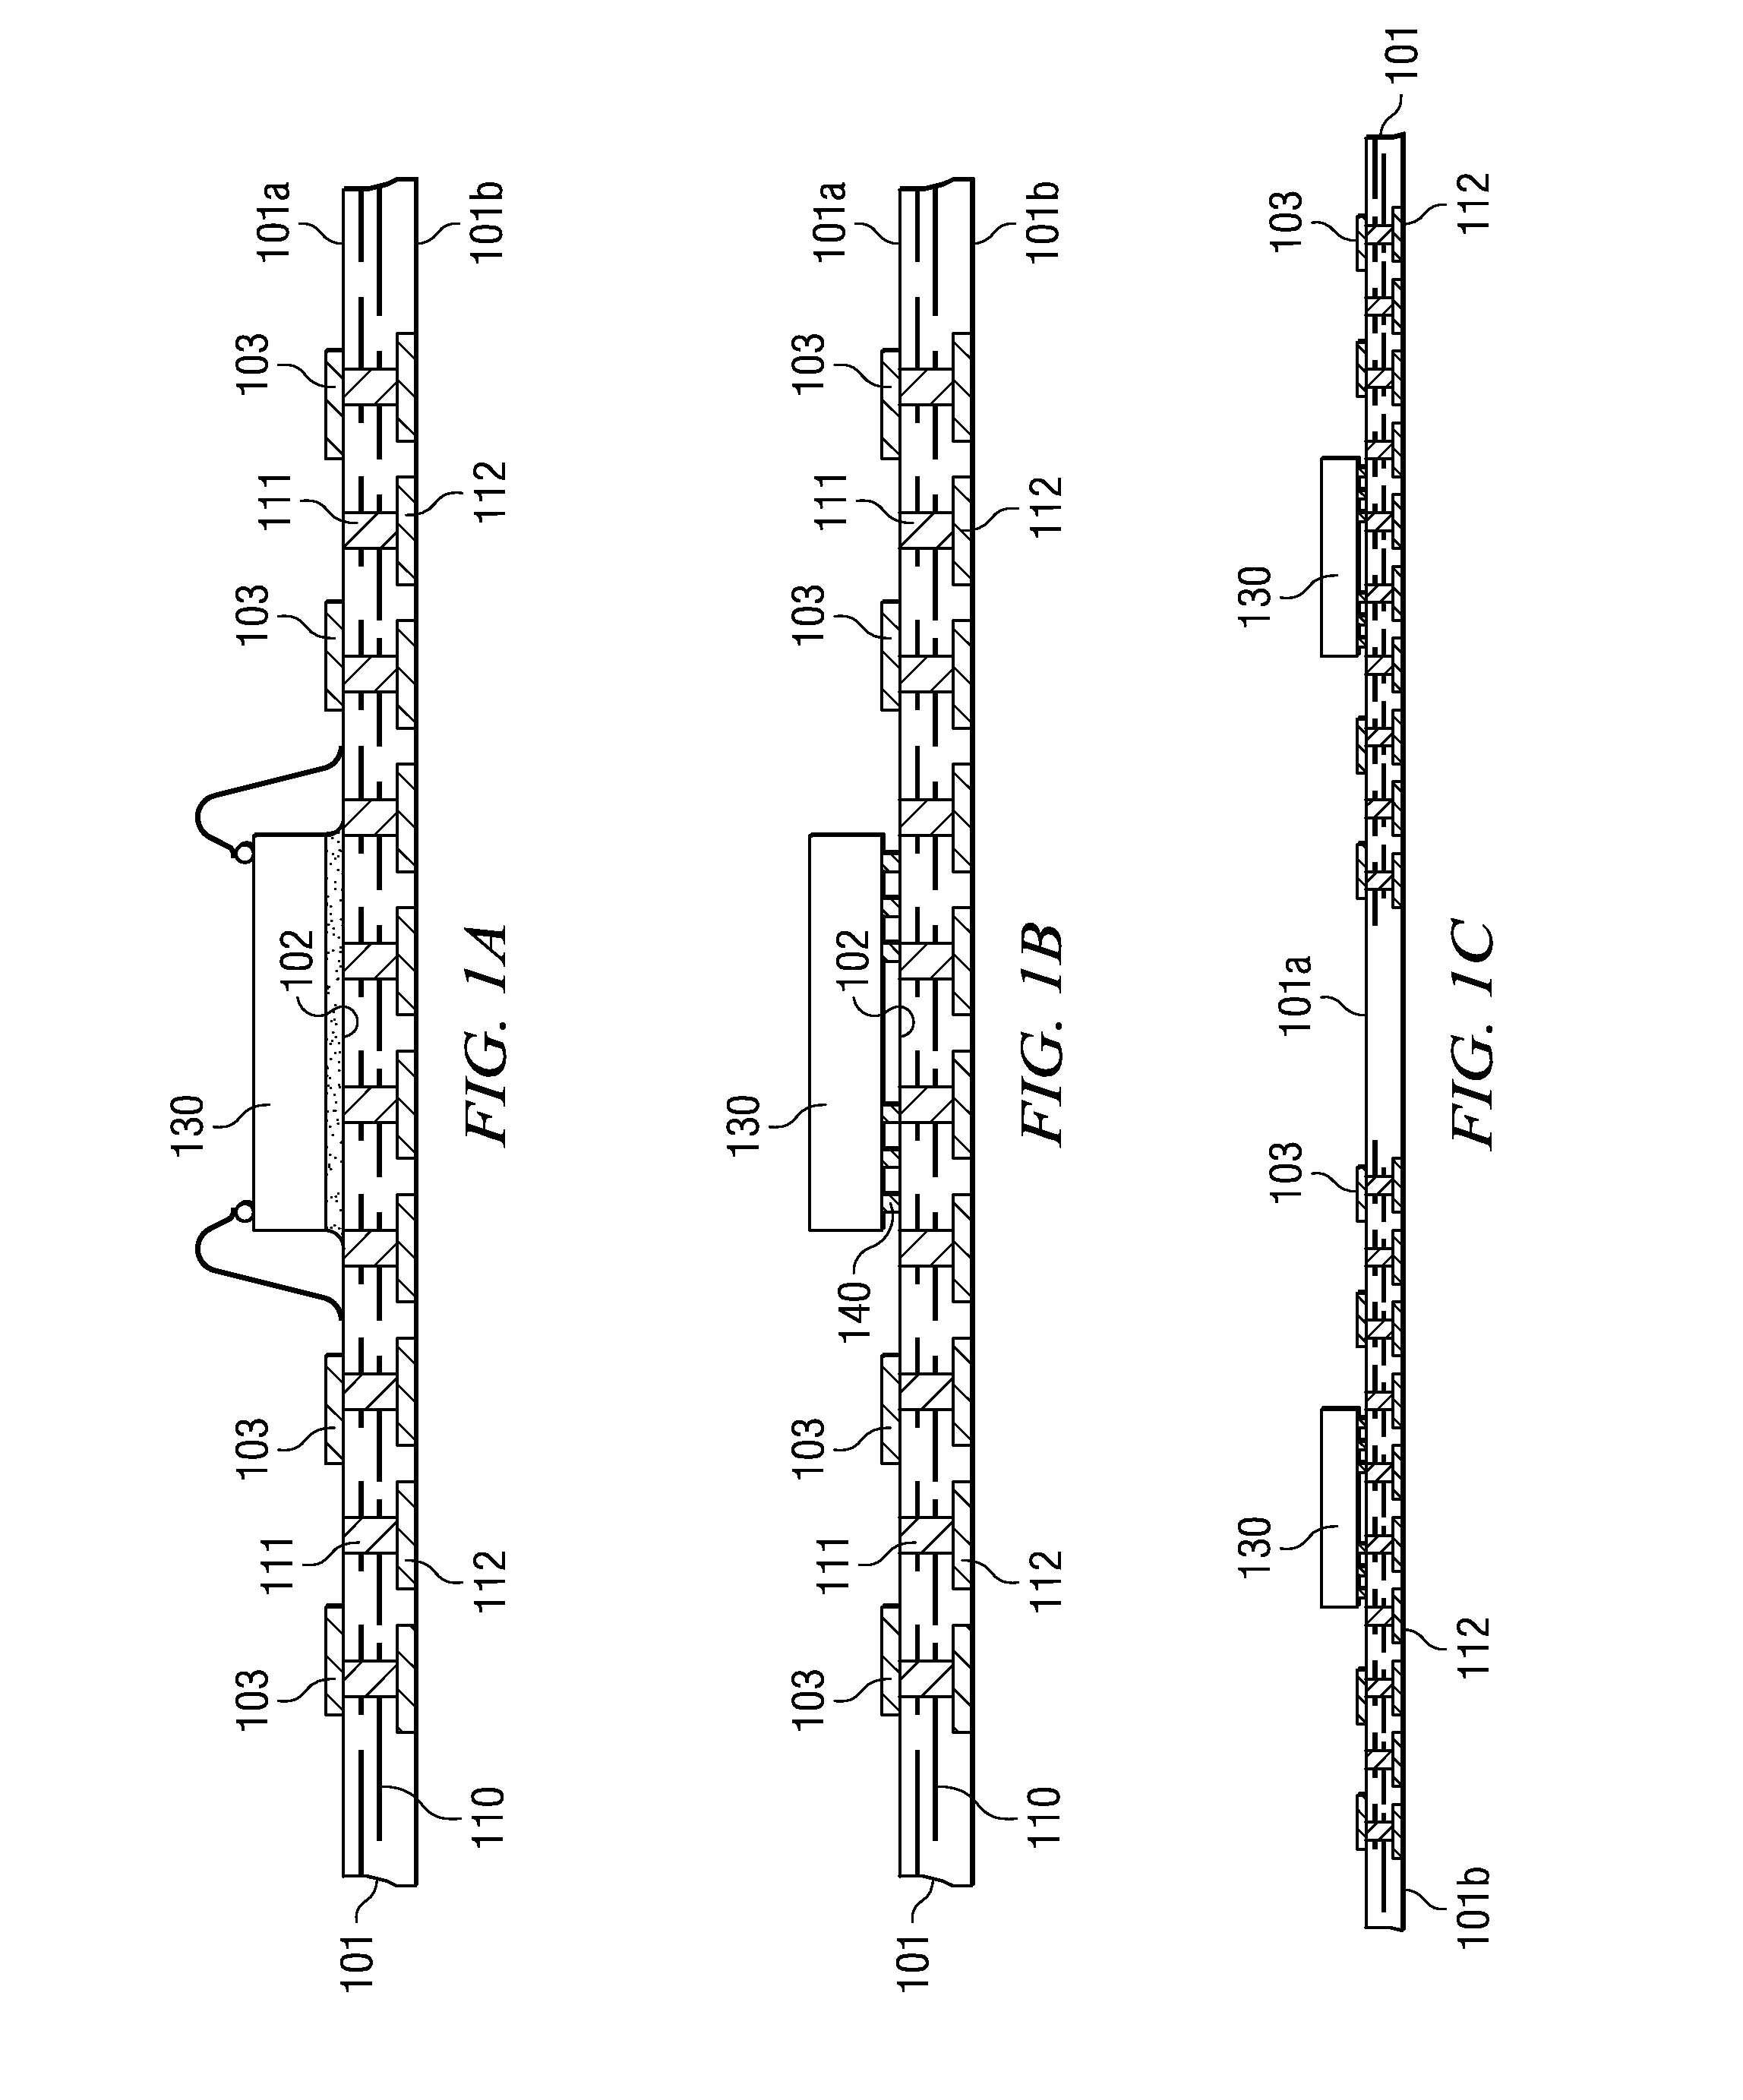 Method for Fabricating Array-Molded Package-On-Package